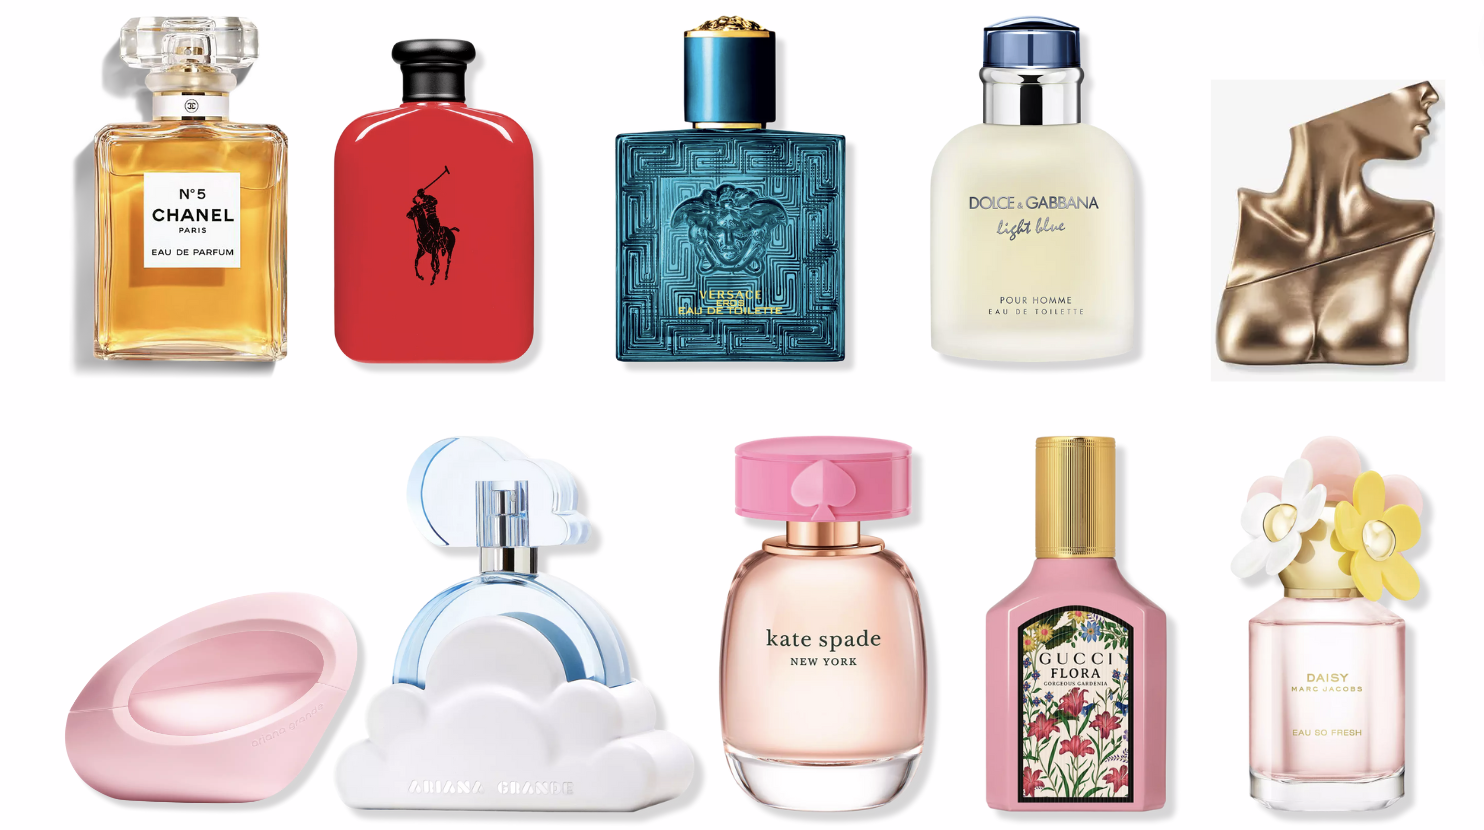 The 7 New Fragrances to Know This Summer